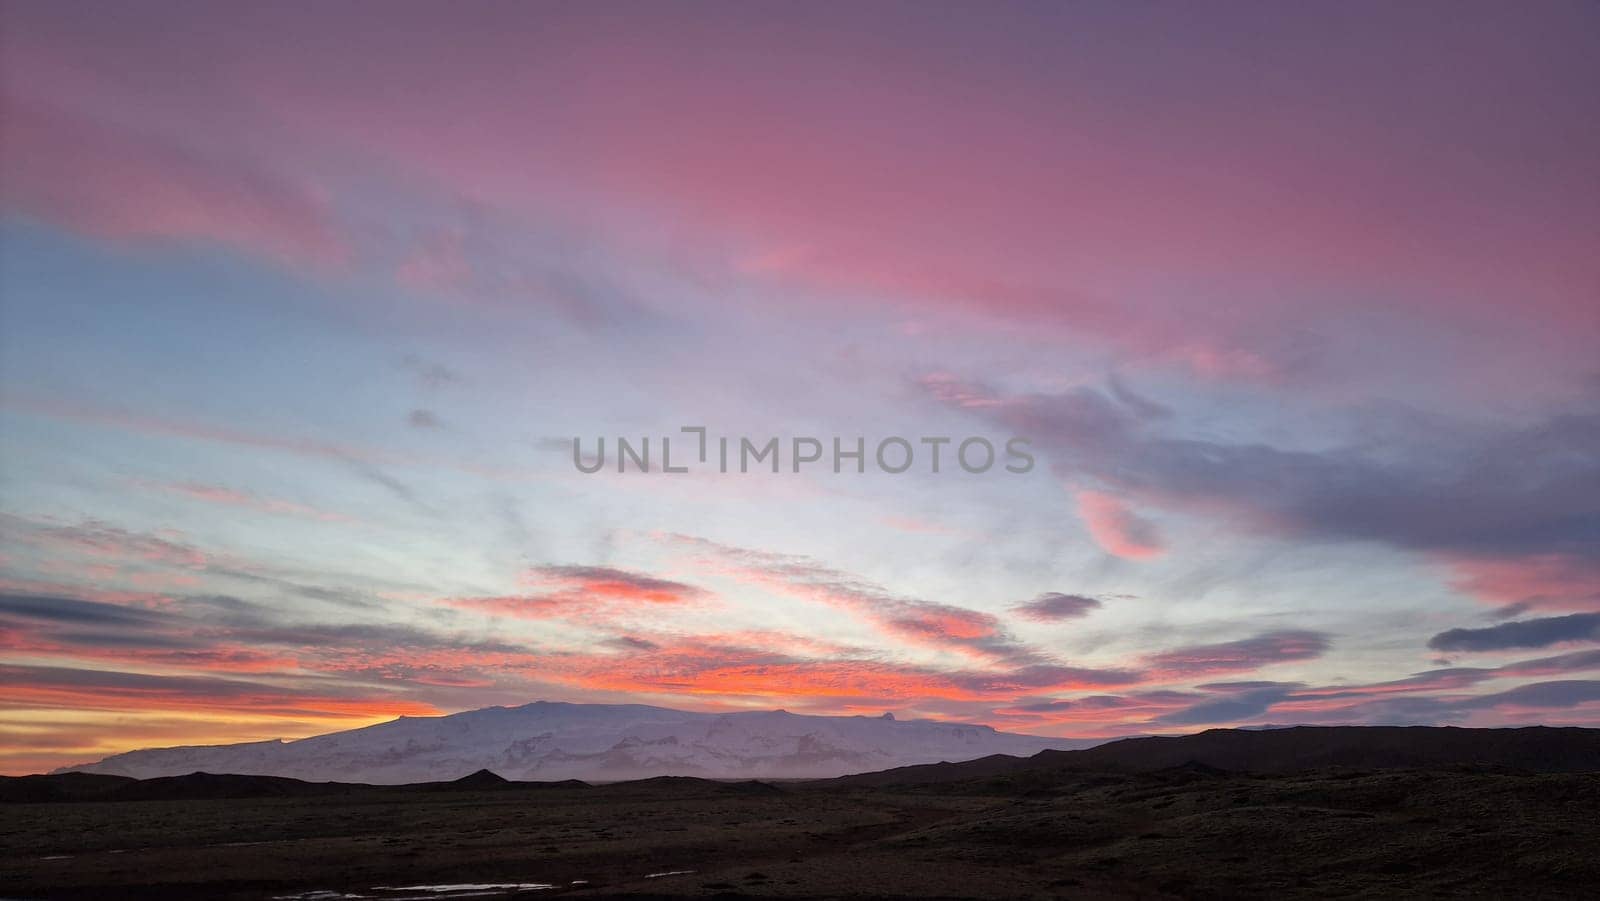 Icelandic nordic colored sky at sunset, beautiful pink and yellow clouds painting magical nordic scenery. Majestic scandinavian view of rosy cotton candy light due to sun setting above mountain.